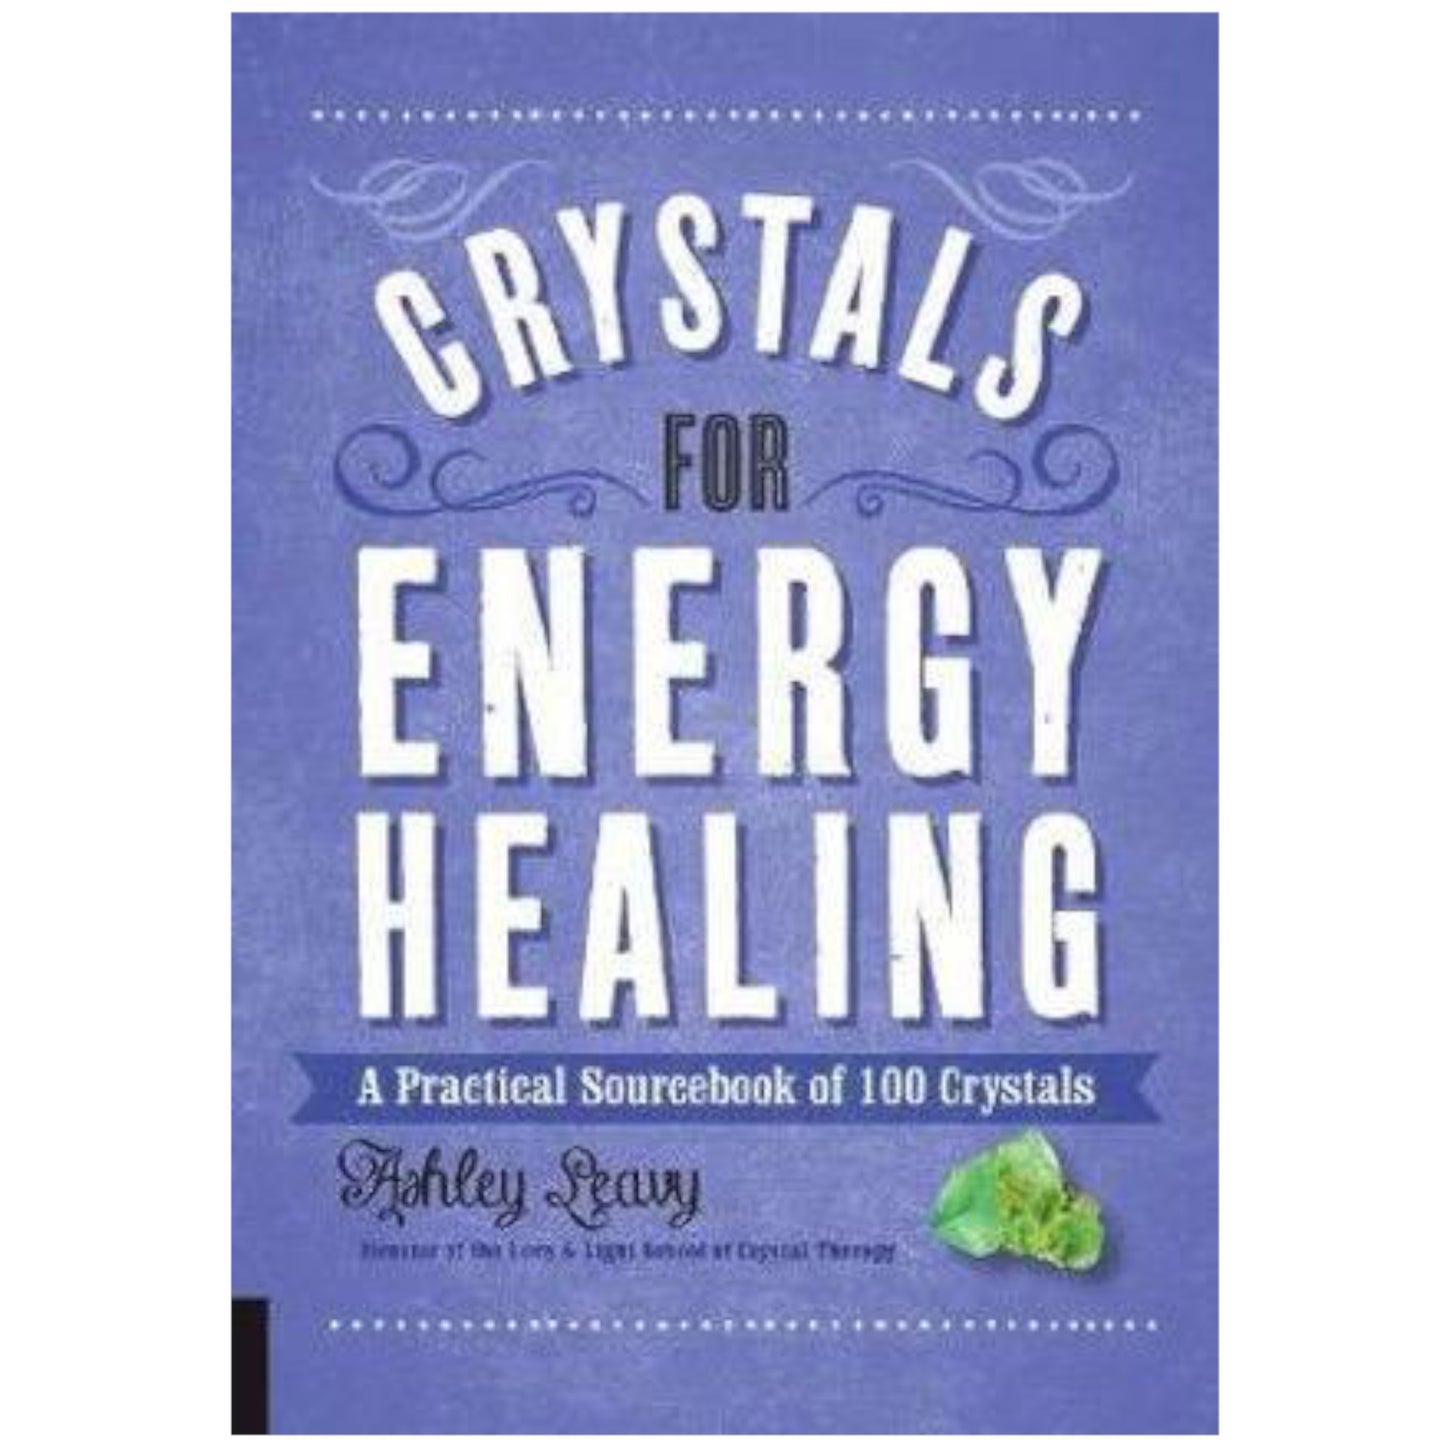 Crystals For Energy Healing